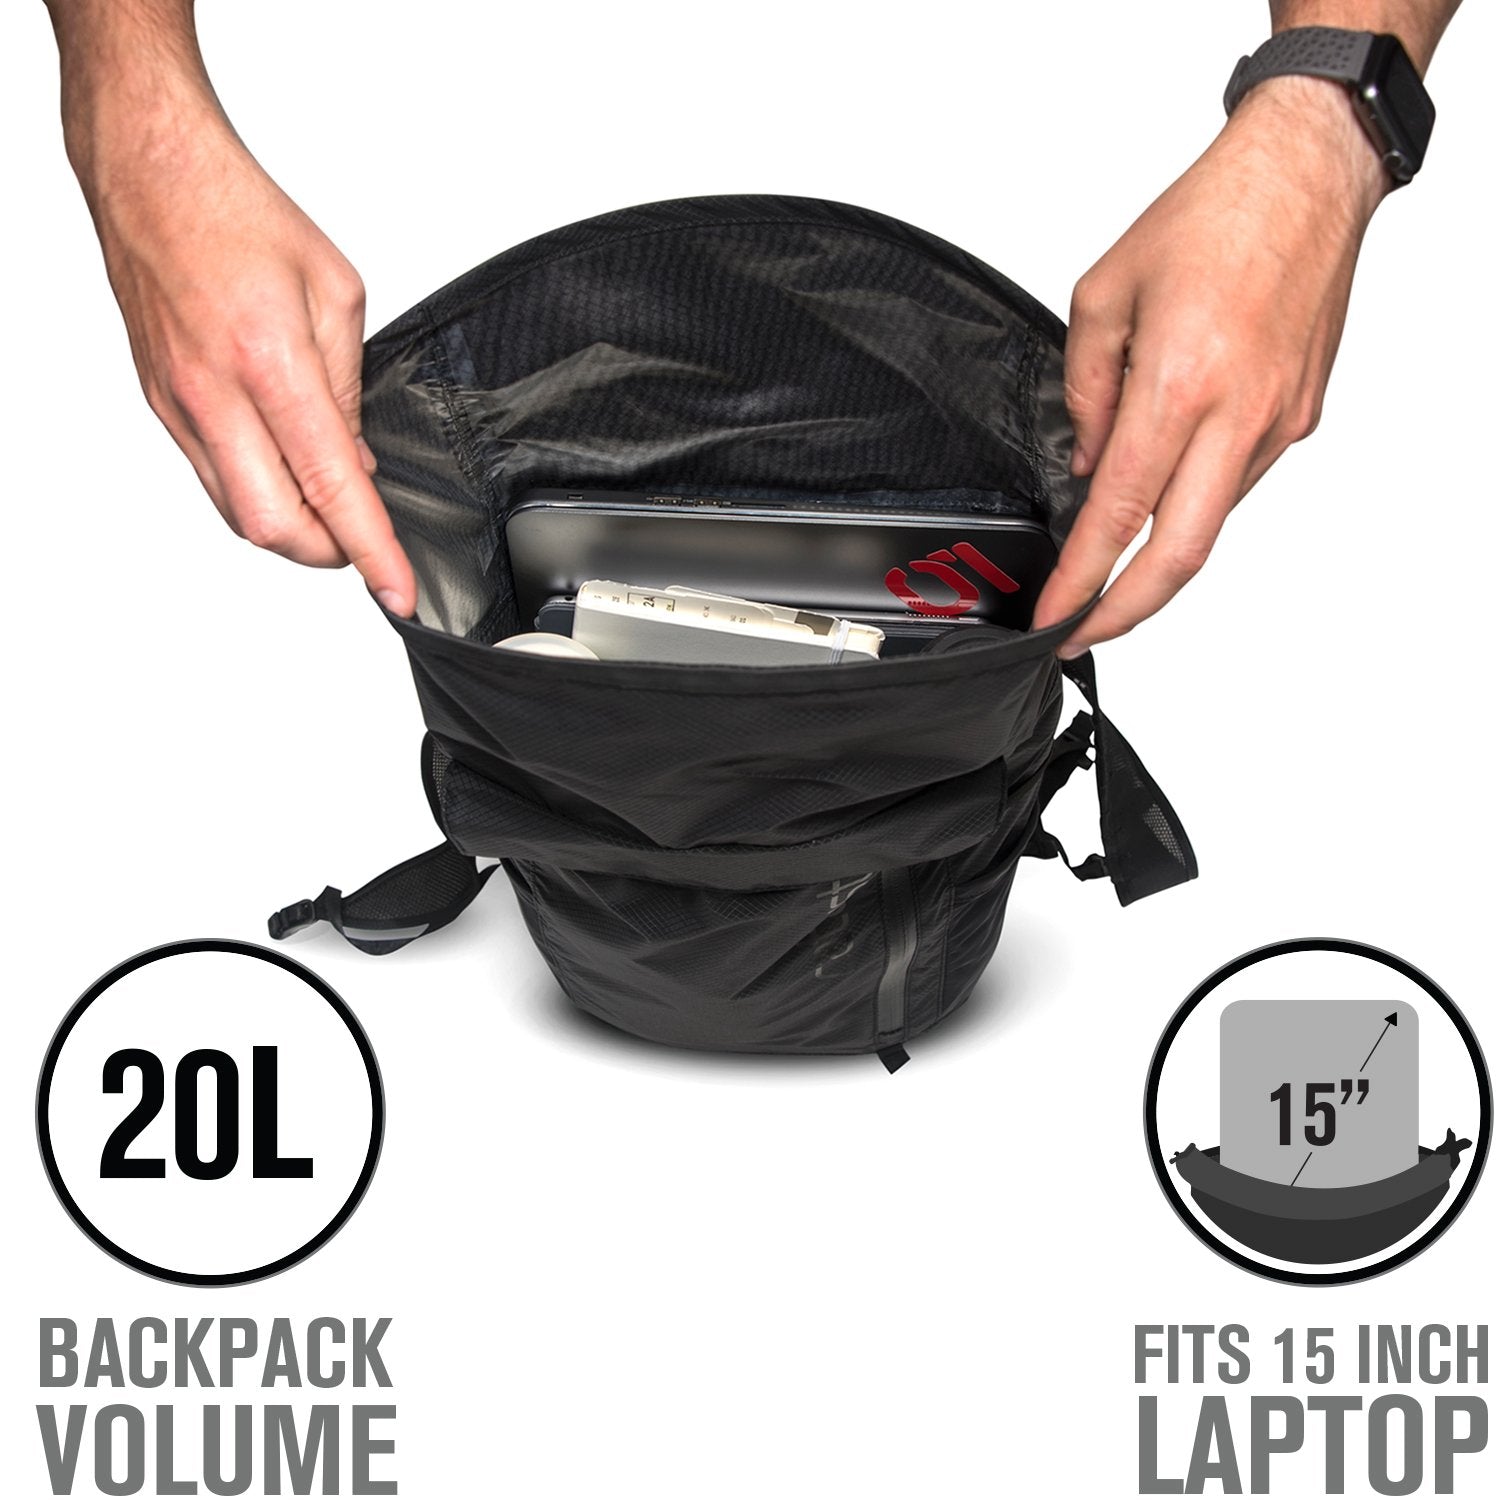 catalyst waterproof 20l backpack top view hand opening the bag with laptop text reads 20l backpack volume 15" fits 15 inch laptop